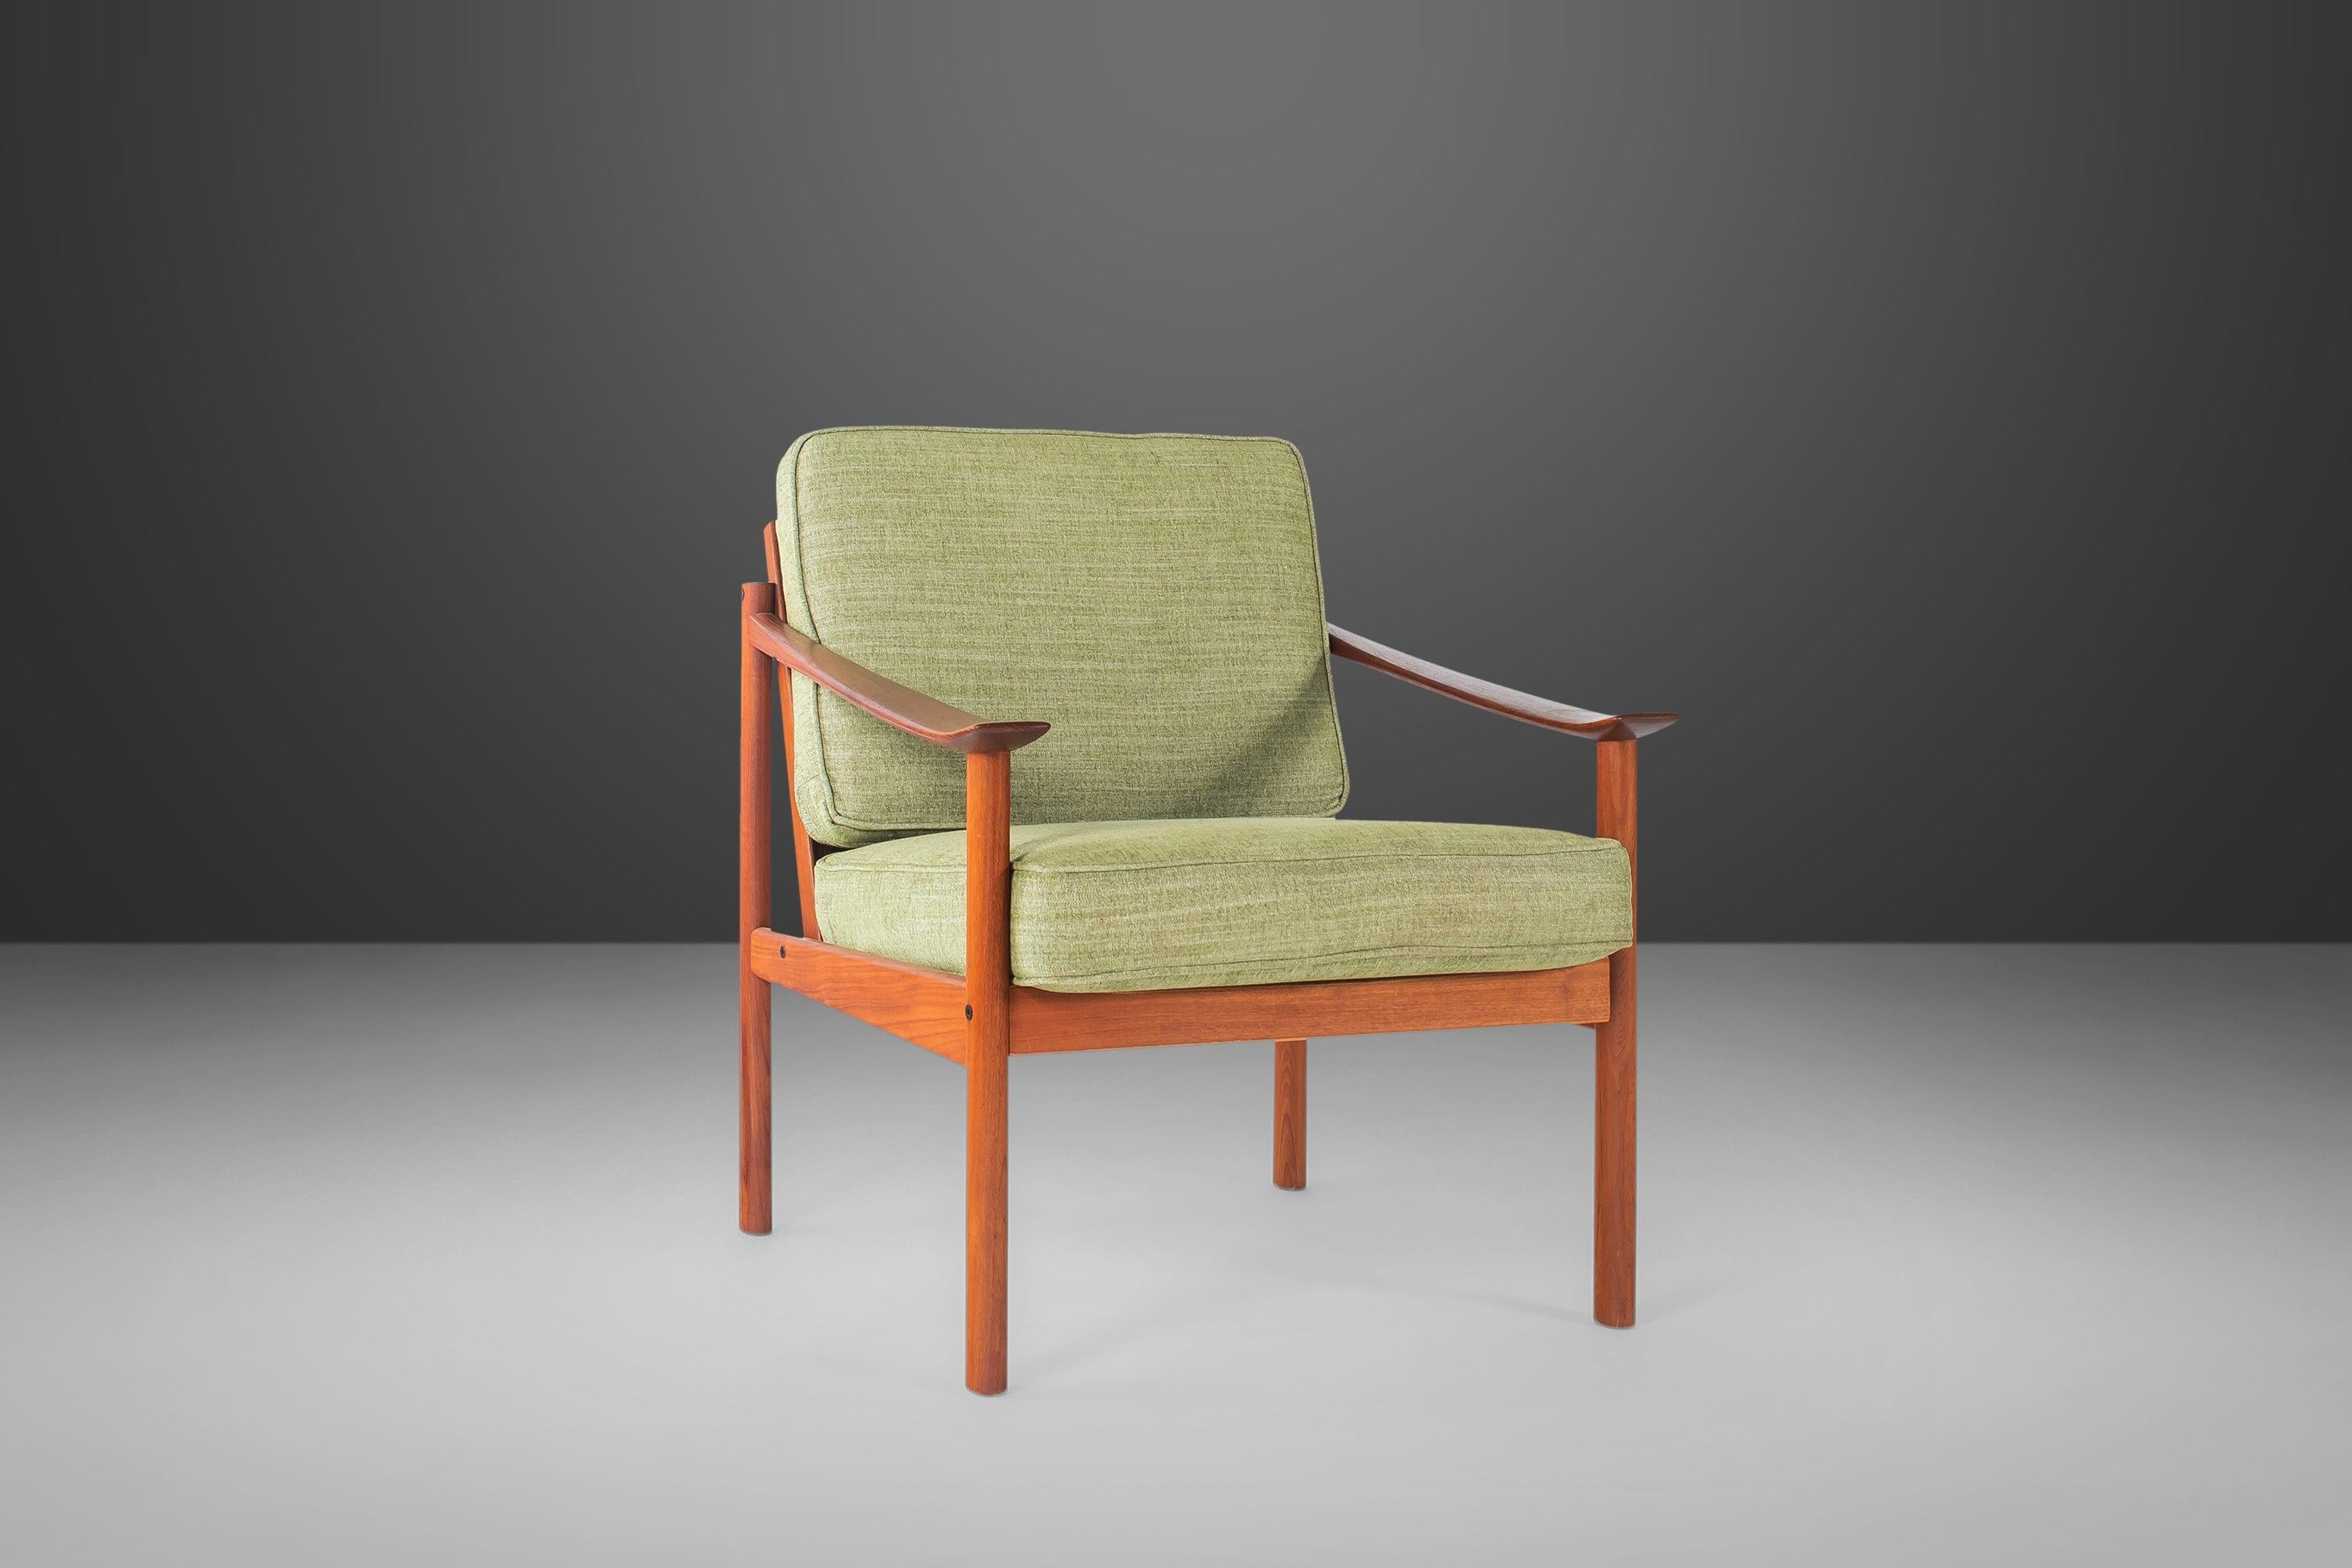 Mid-20th Century Set of Two '2' Lounge Chairs by Peter Hvidt for Soborg Møbler, Denmark, c. 1960s For Sale